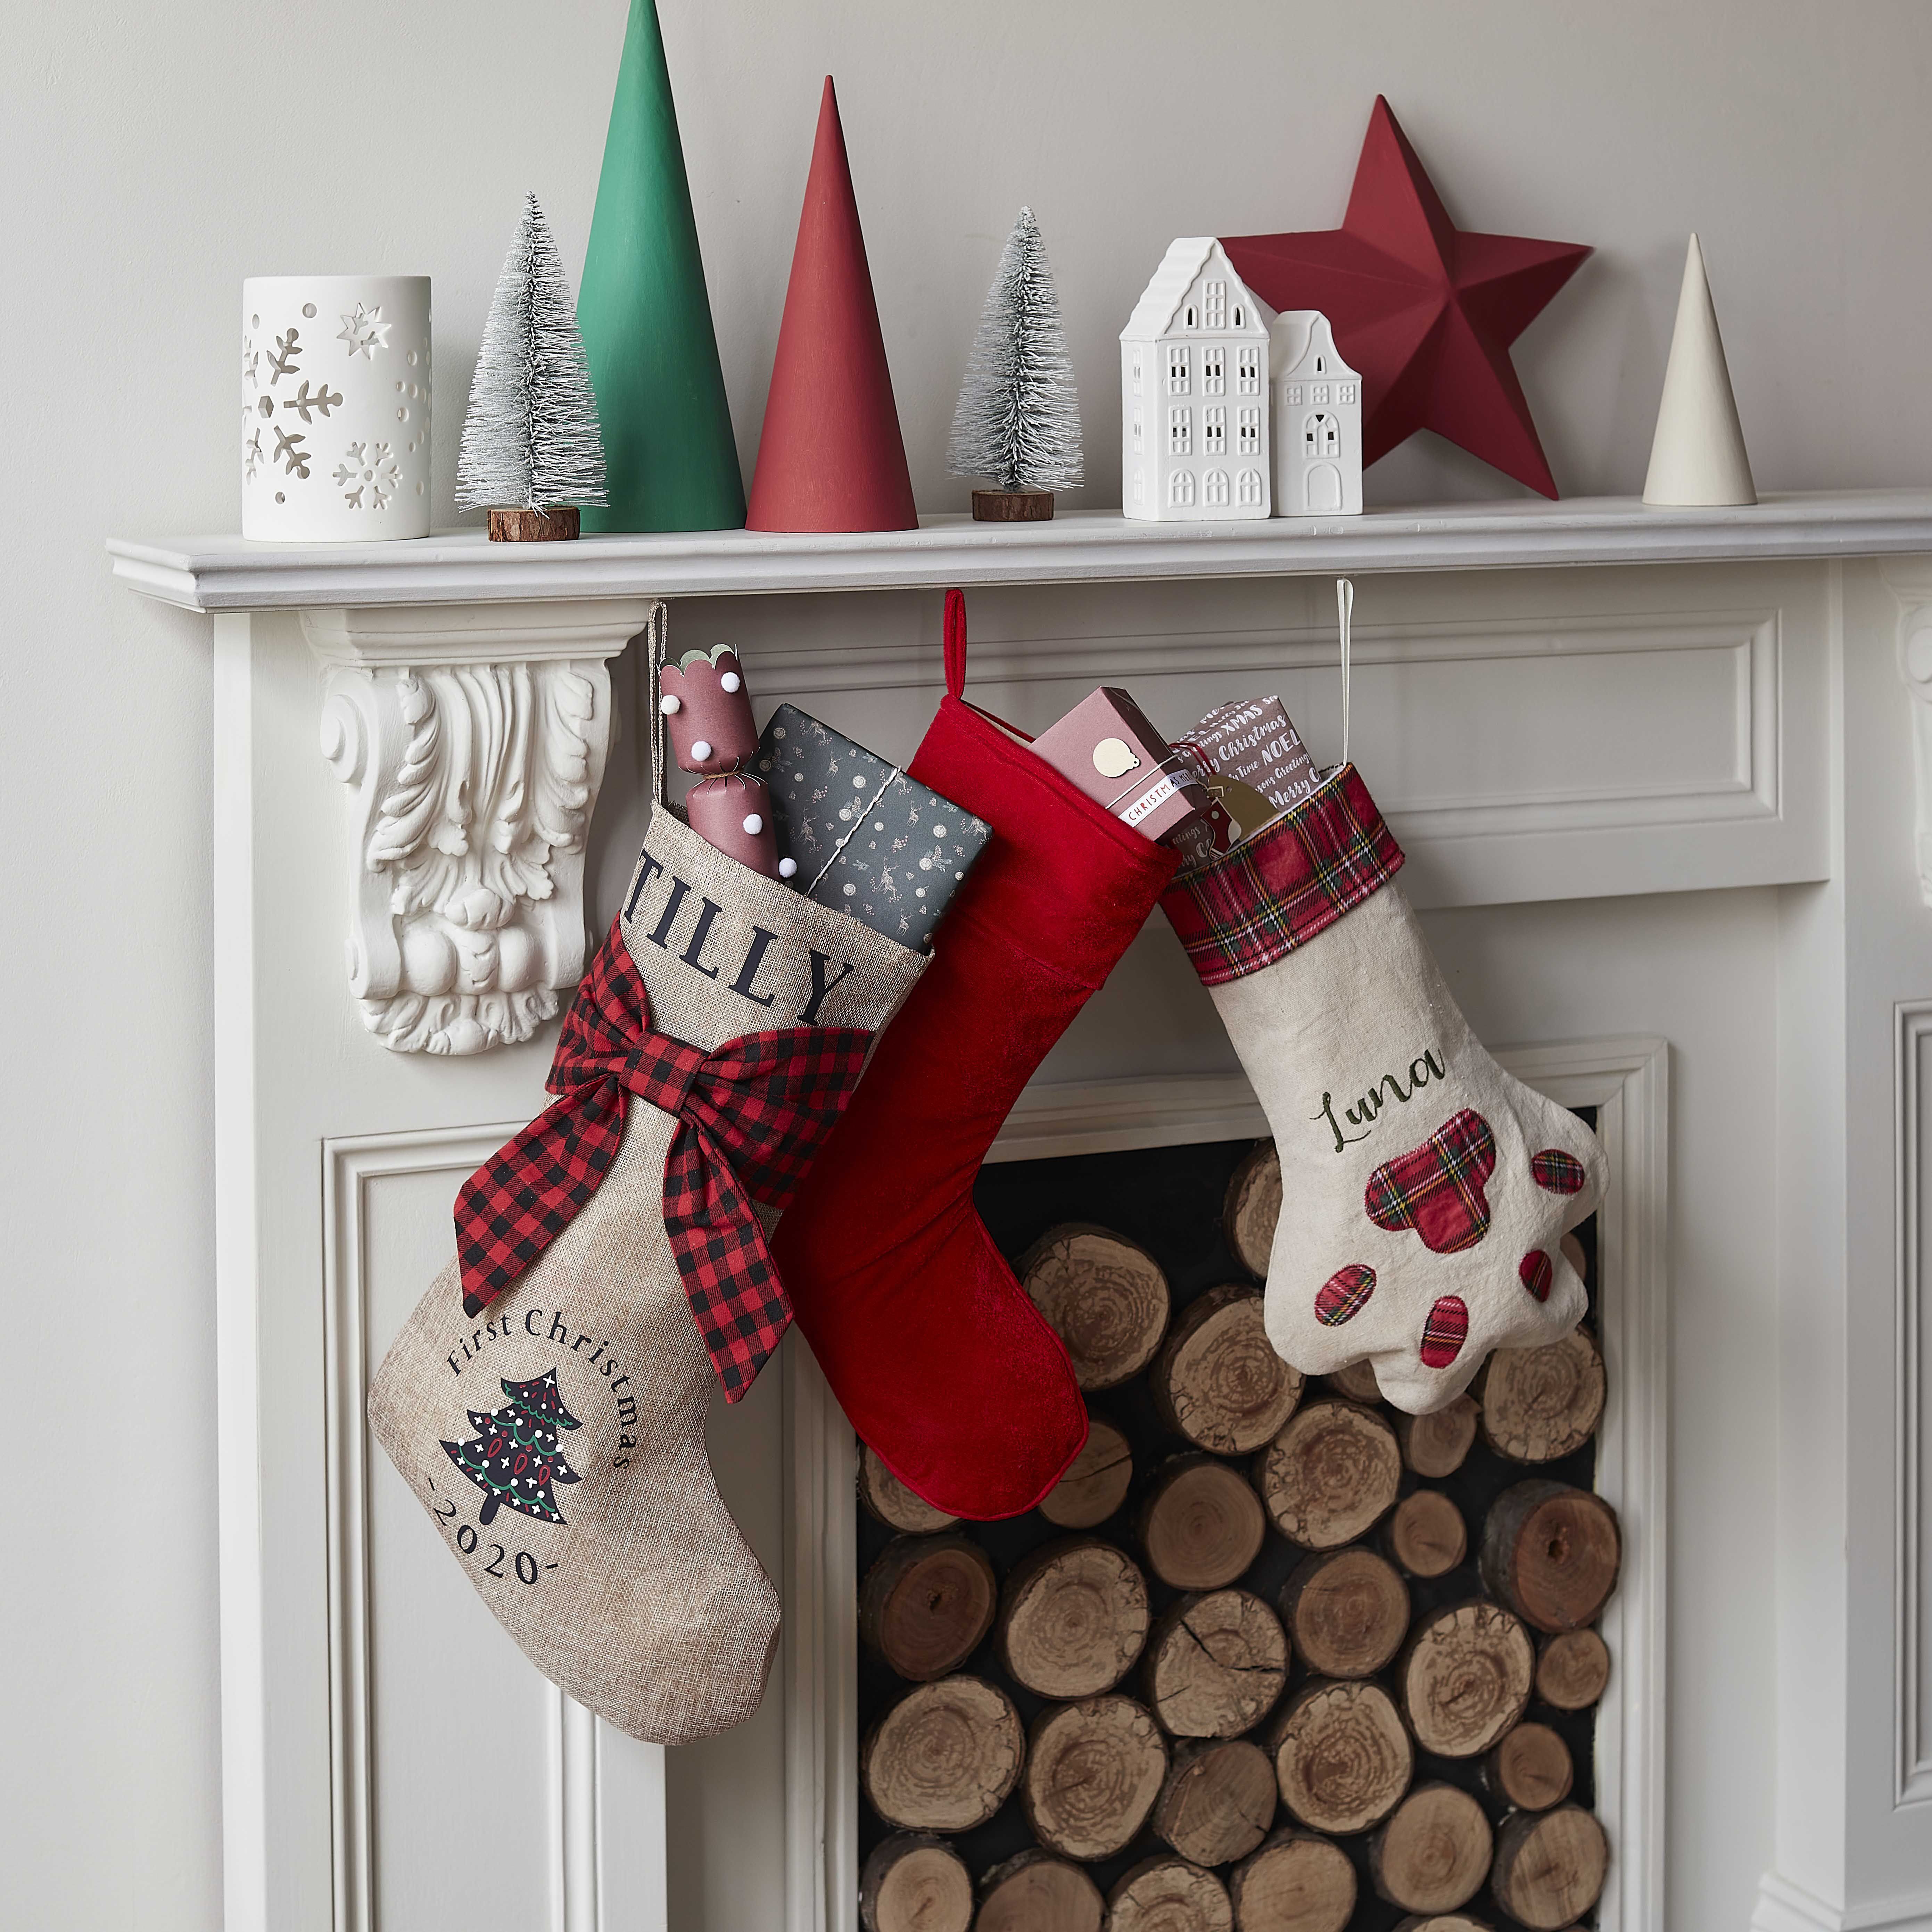 Cricut: How to Make a Baby's First Christmas Stocking